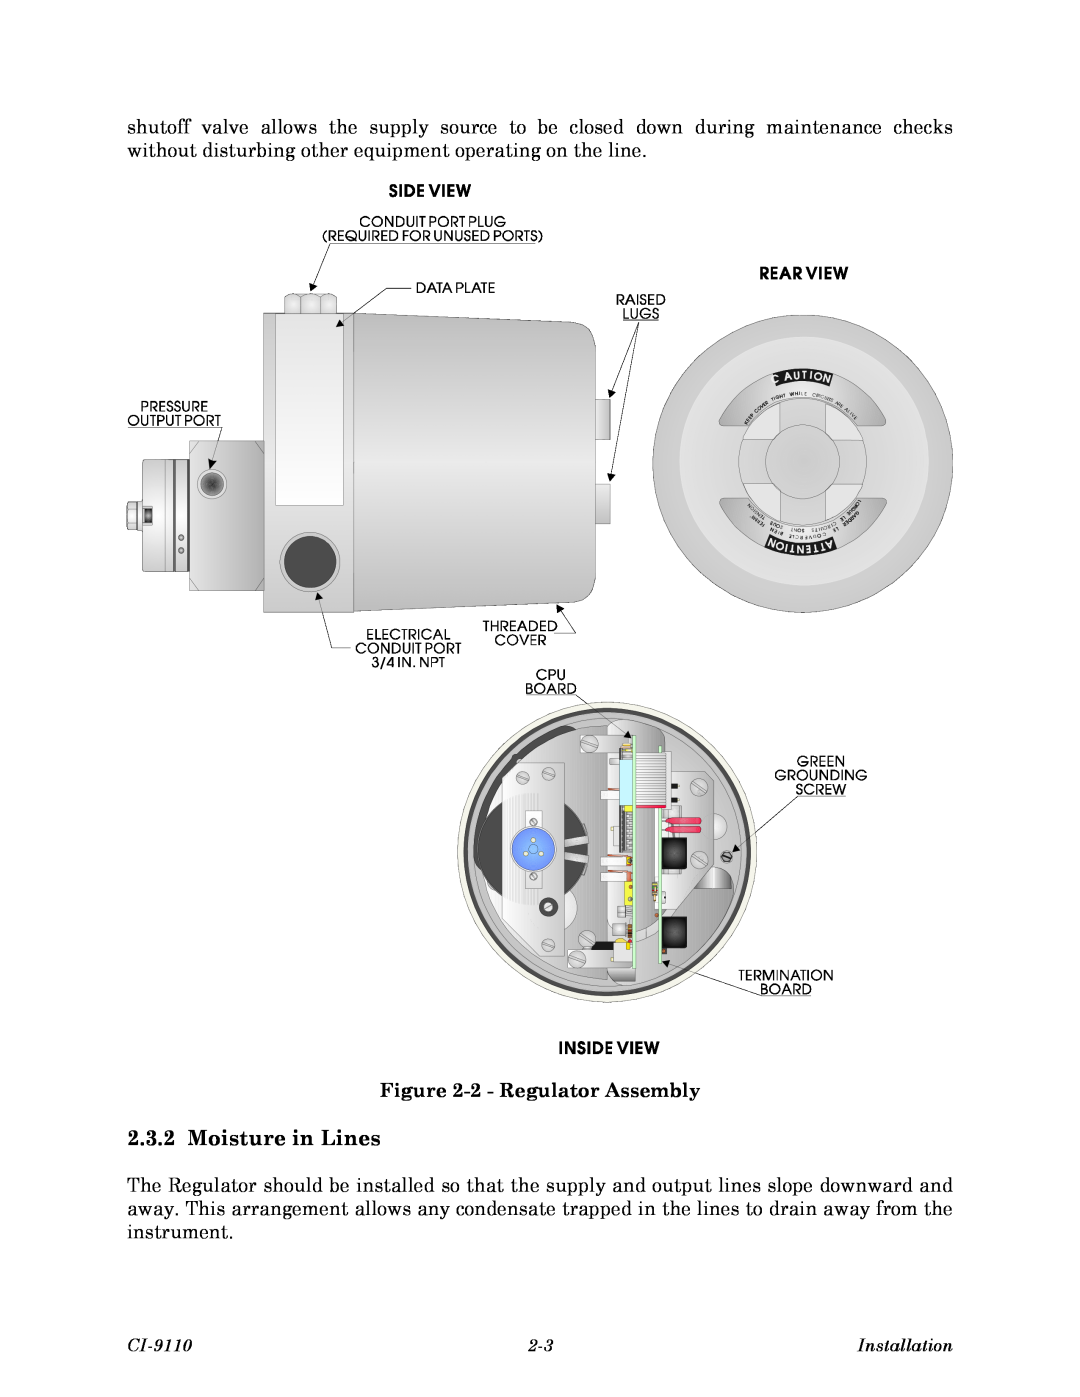 Emerson Process Management Series 9110, CI-9110, 9110-00A instruction manual Moisture in Lines, 2 - Regulator Assembly 